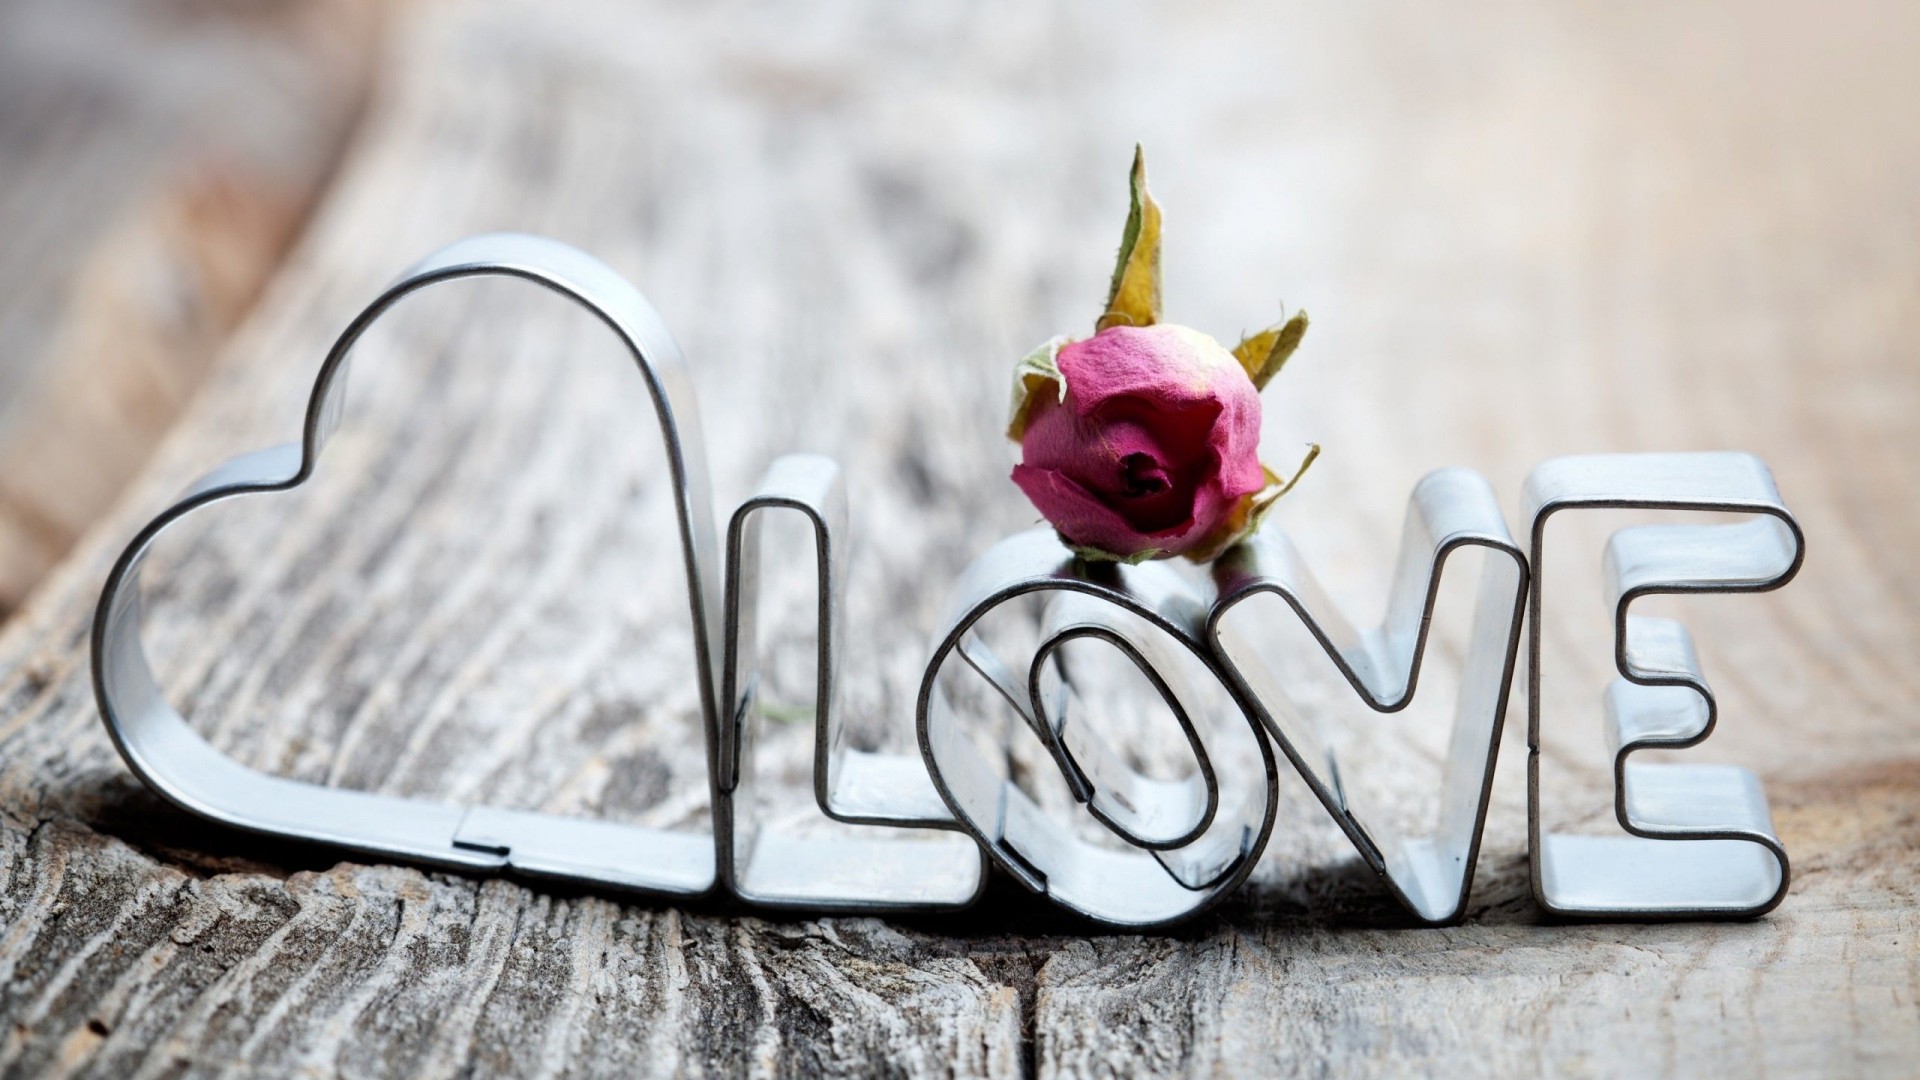 Love Images, Backgrounds & HD Wallpapers free download